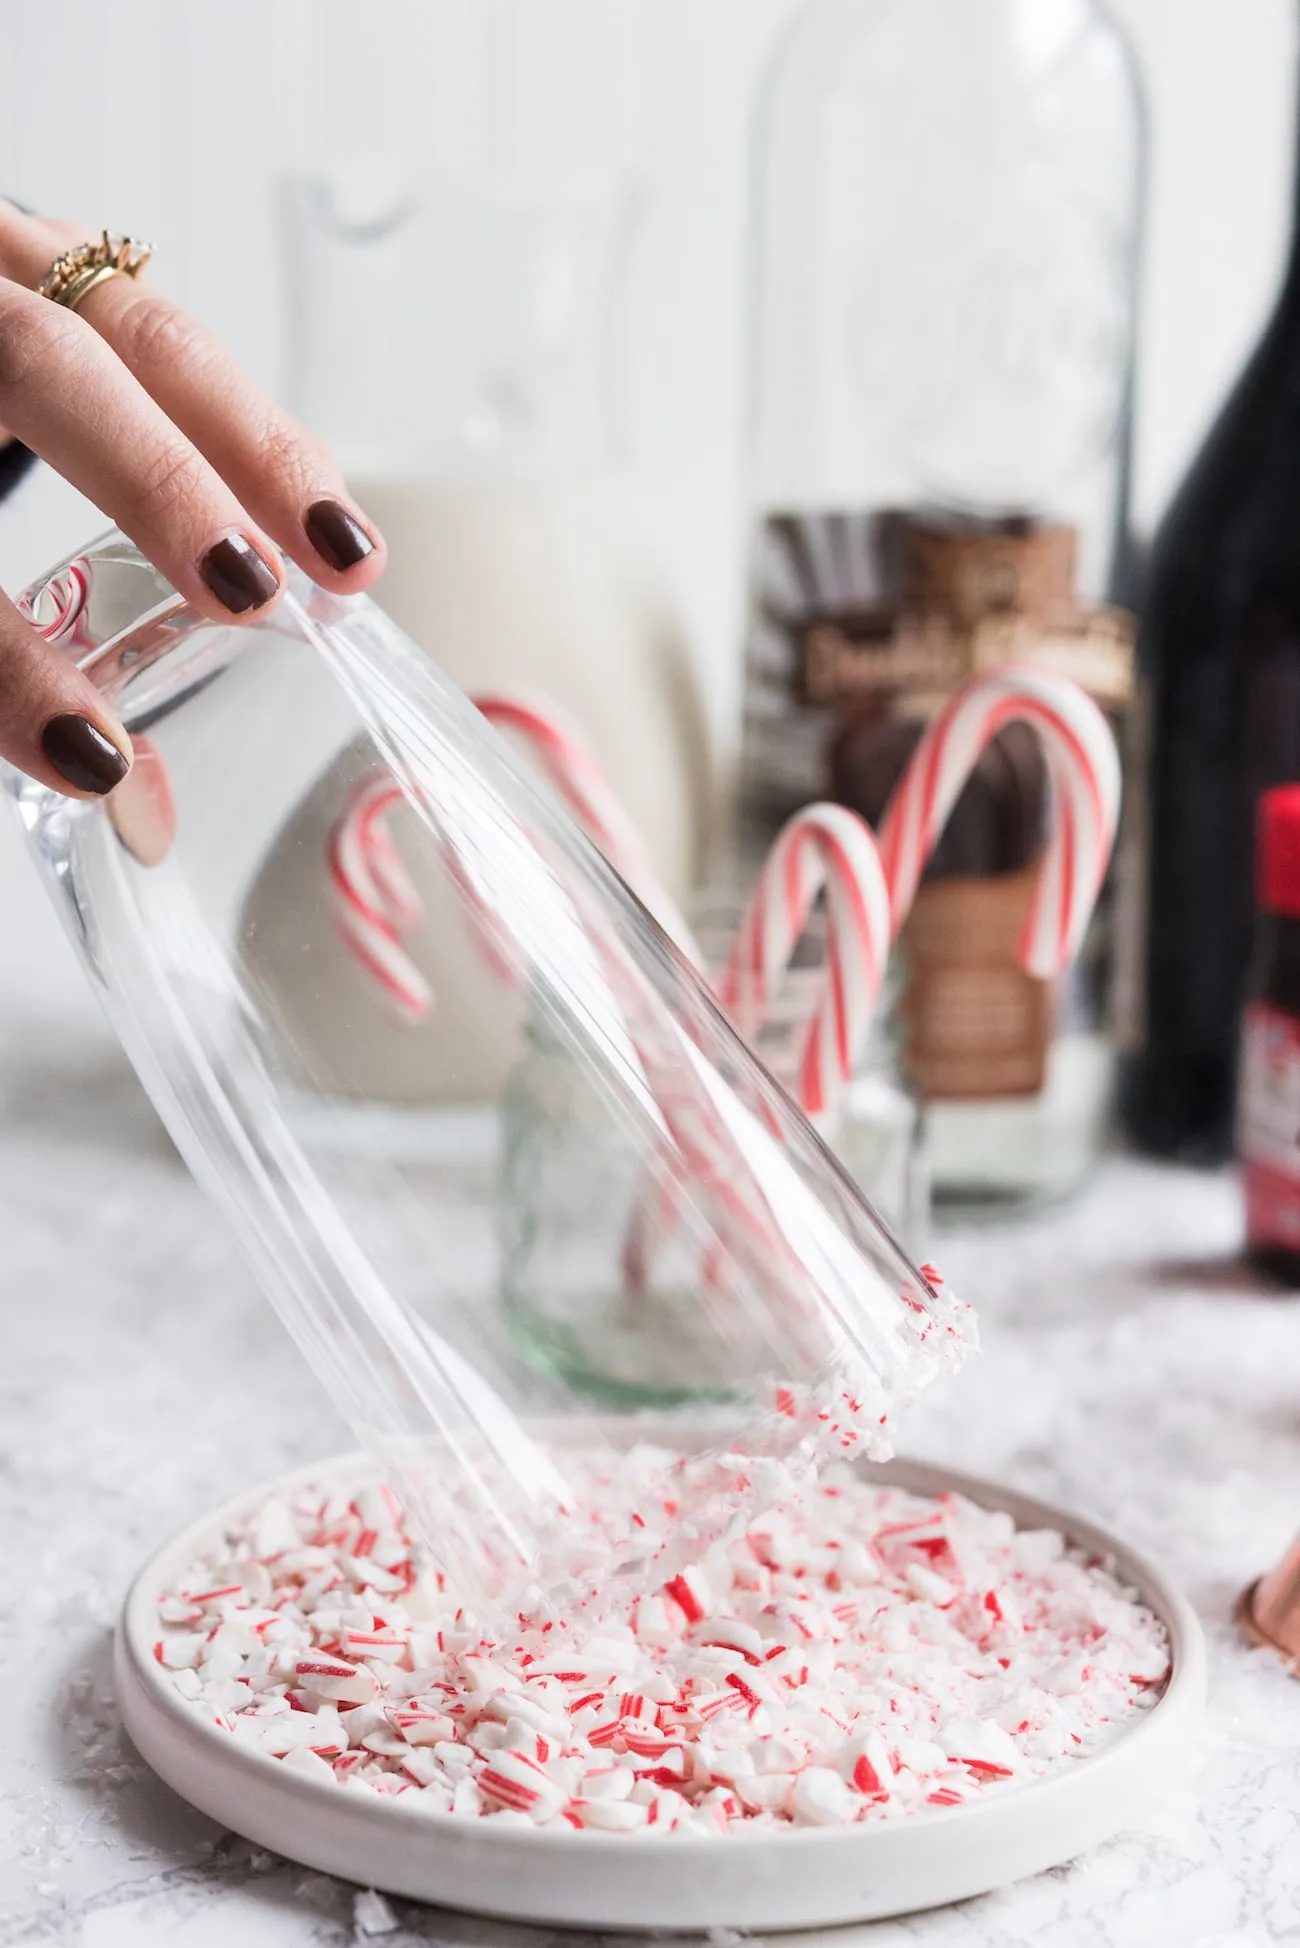 White Chocolate Peppermint White Russian | Christmas cocktails and holiday entertaining tips from entertaining blog @cydconverse